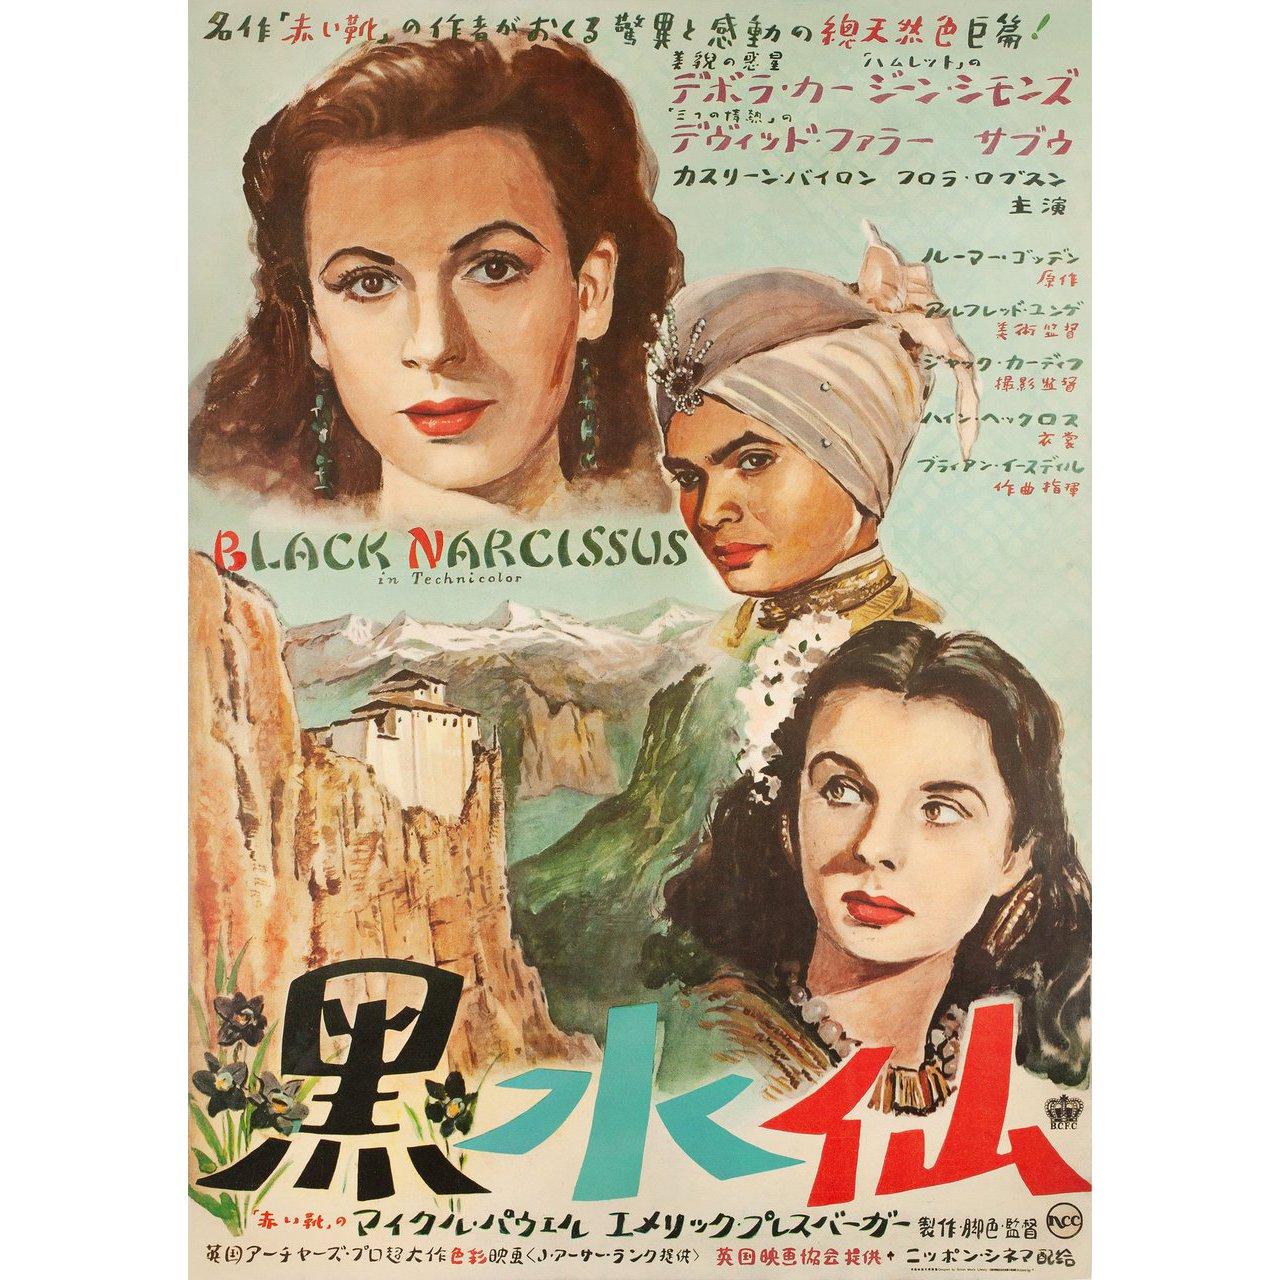 Original 1940s Japanese B2 poster by Hisamitsu Noguchi for the first Japanese theatrical release of the film Black Narcissus directed by Michael Powell / Emeric Pressburger with Deborah Kerr / Flora Robson / Jenny Laird / Judith Furse. Fine